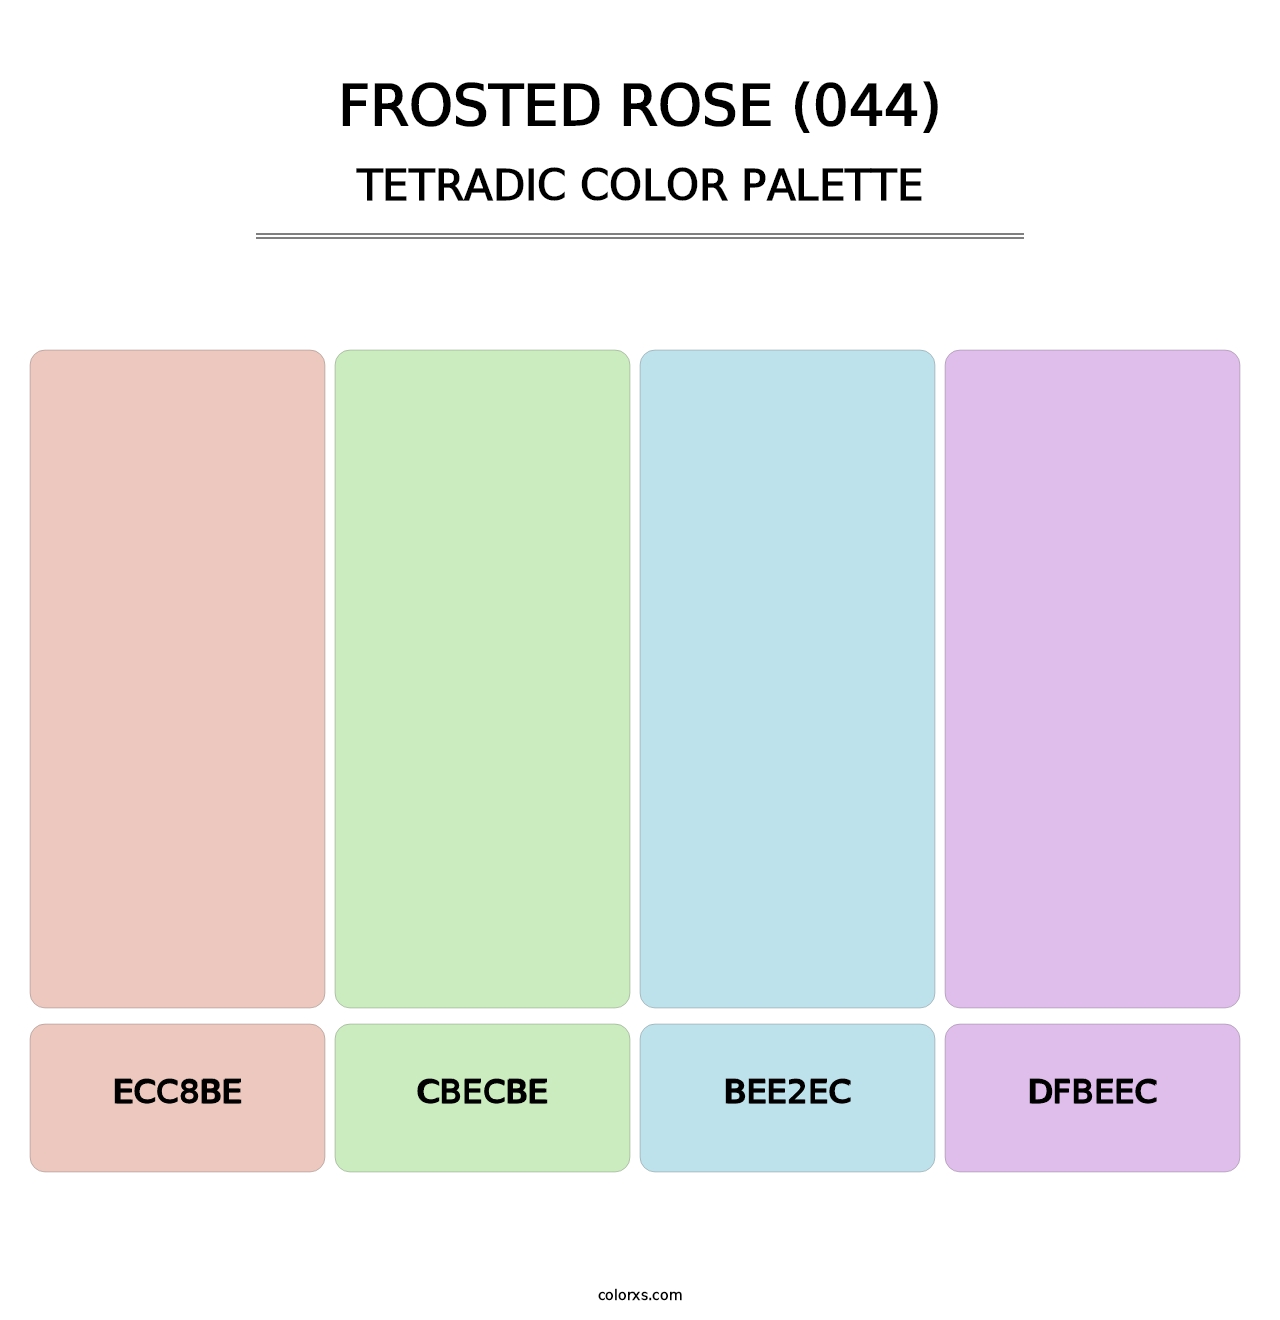 Frosted Rose (044) - Tetradic Color Palette